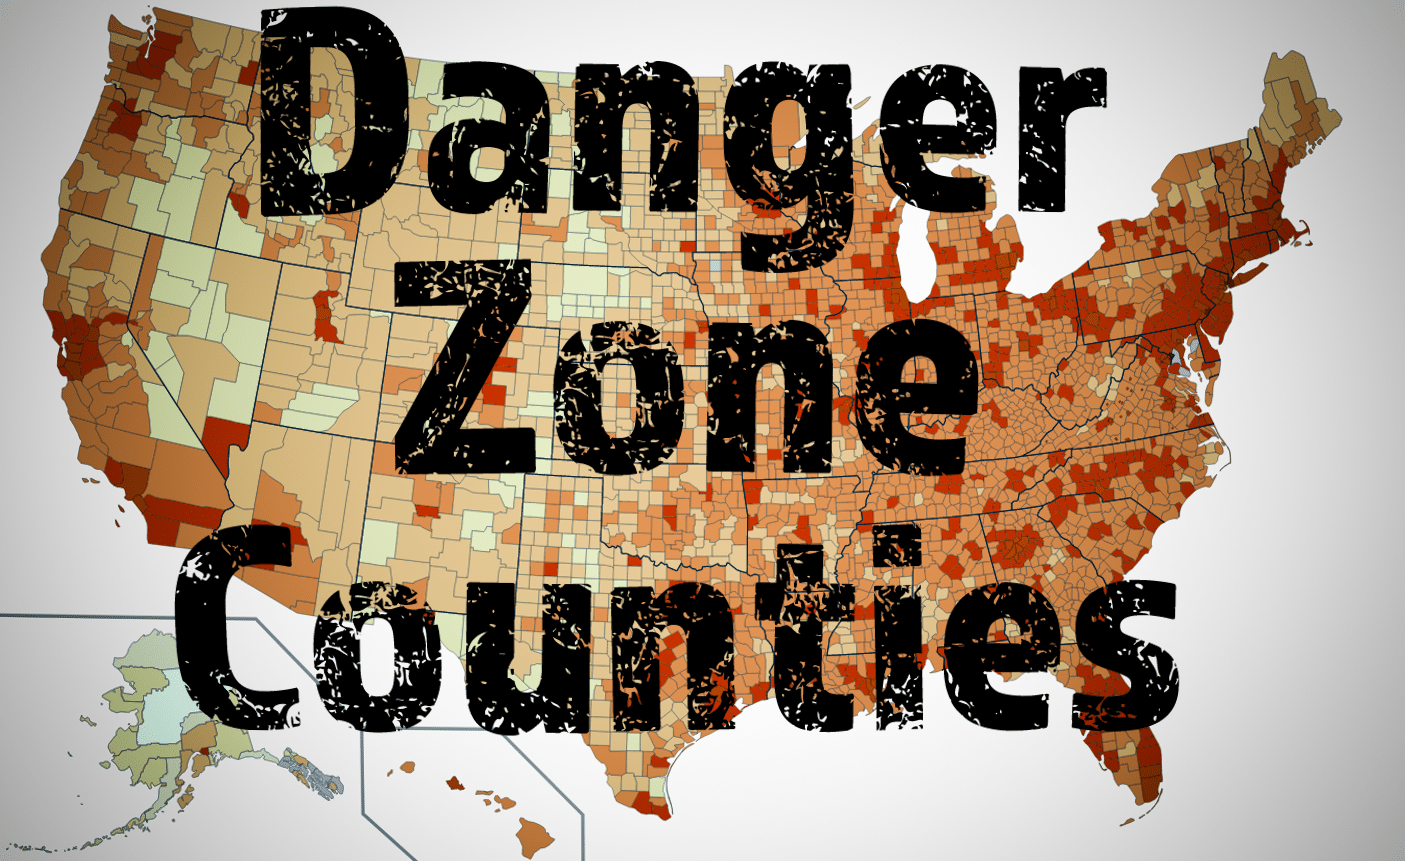 Map of United States Counties color coded to show which ones are the higher population densities - with text Danger Zone Counties over the top